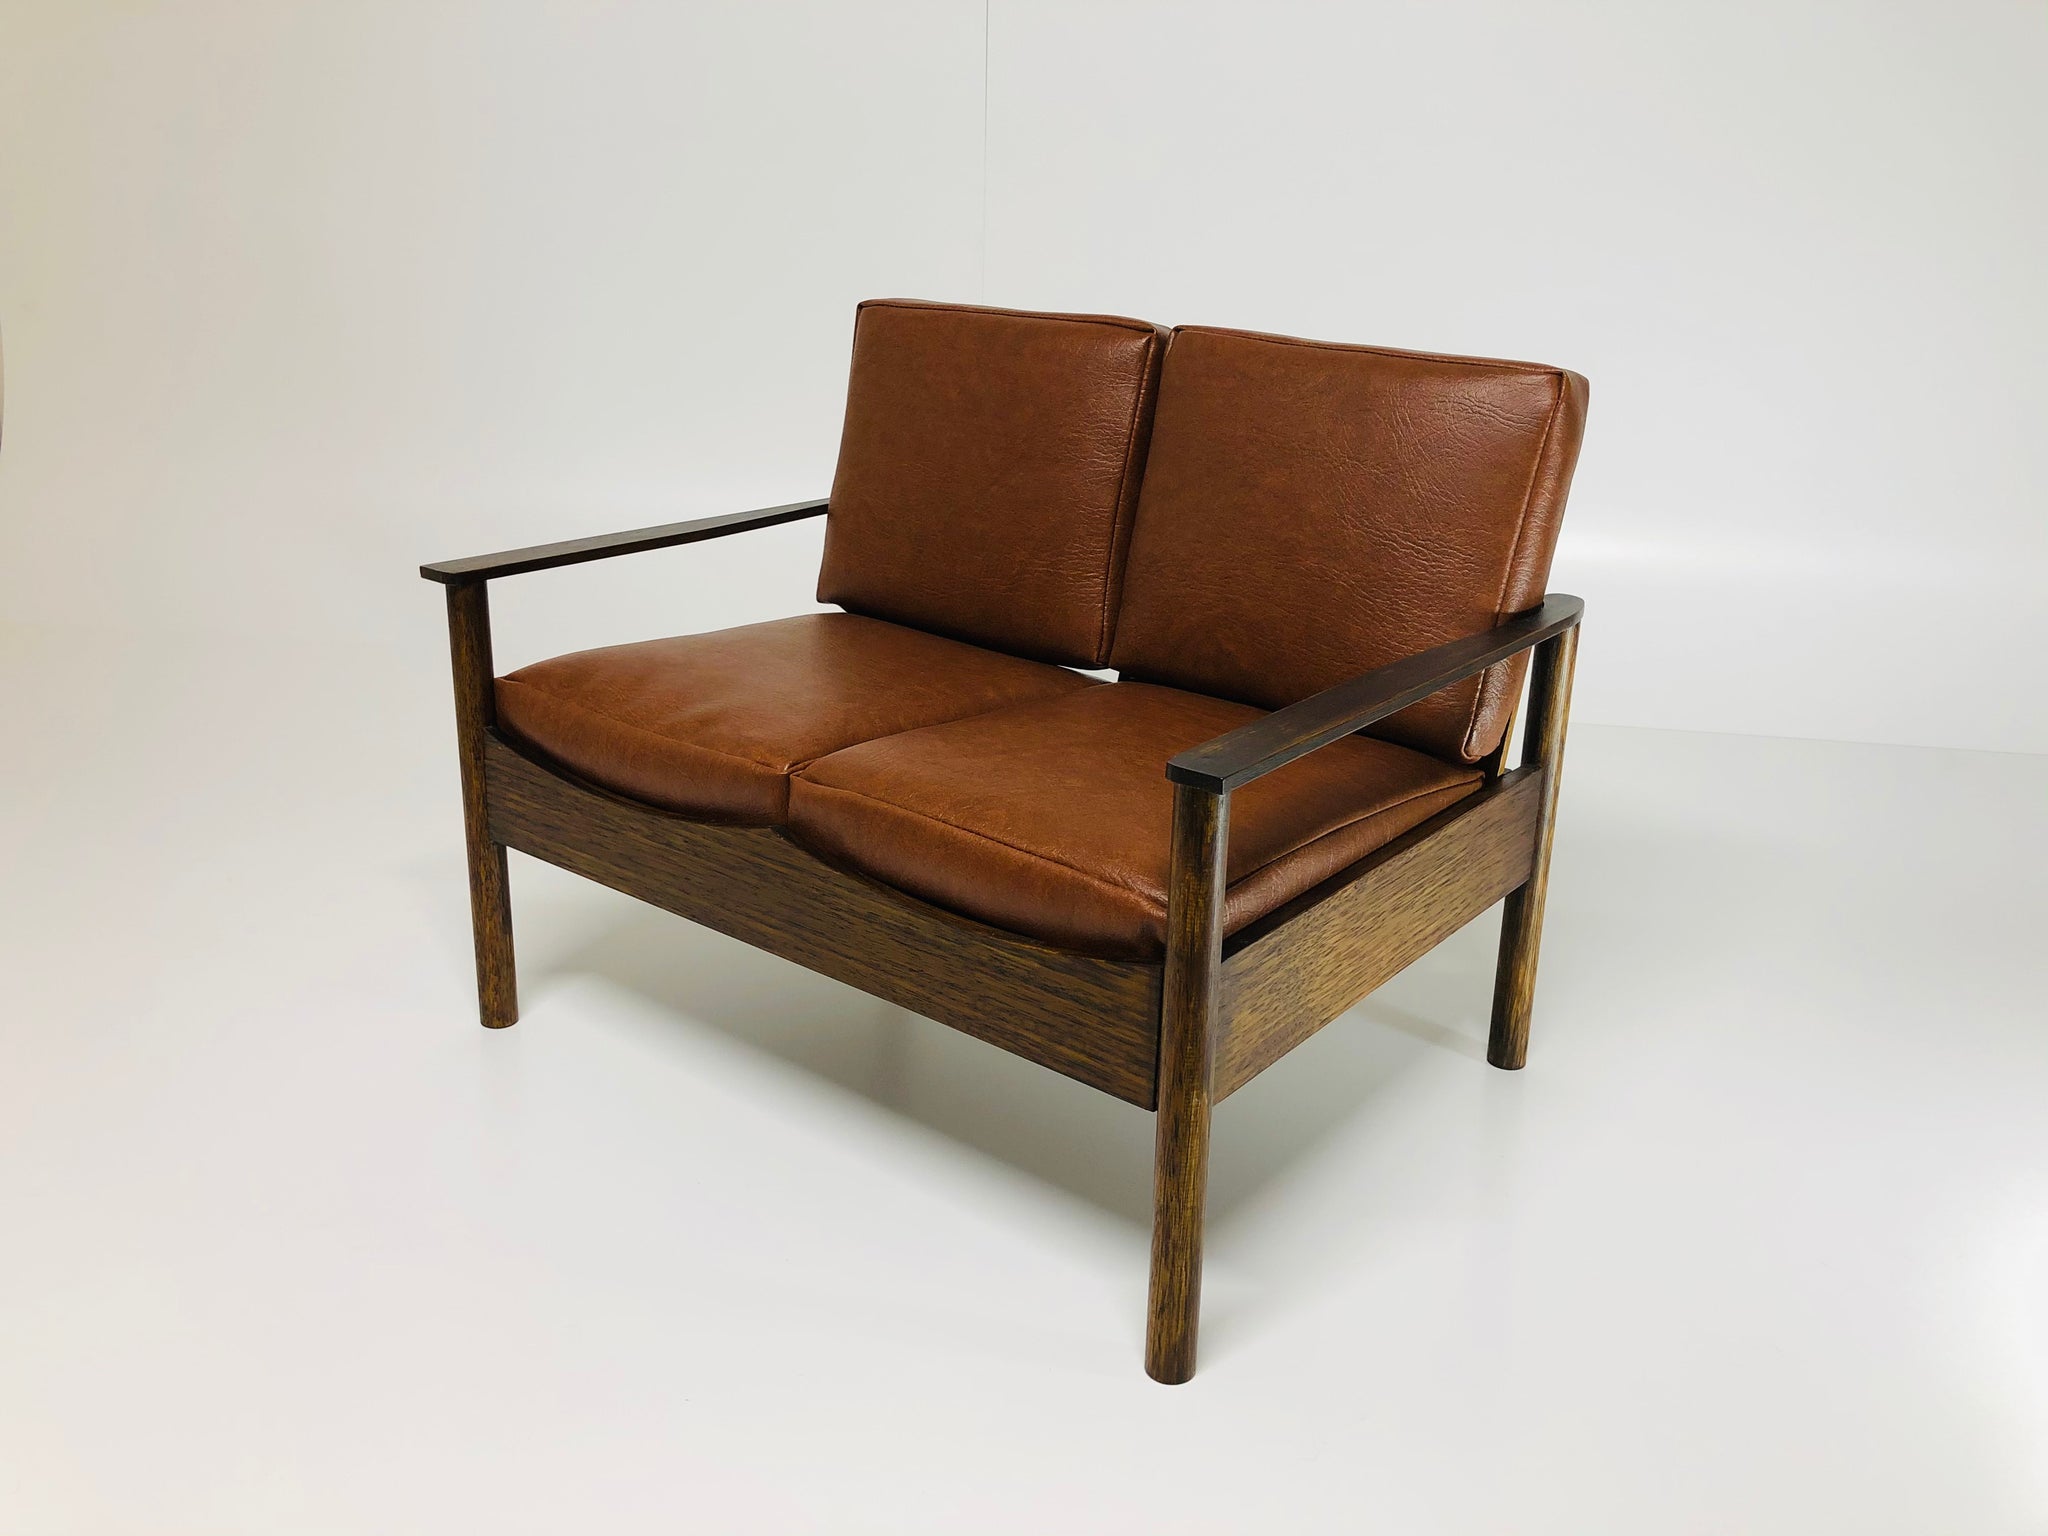 Blanket & Couch Pet Sofa (2 seater) - 70's Brown